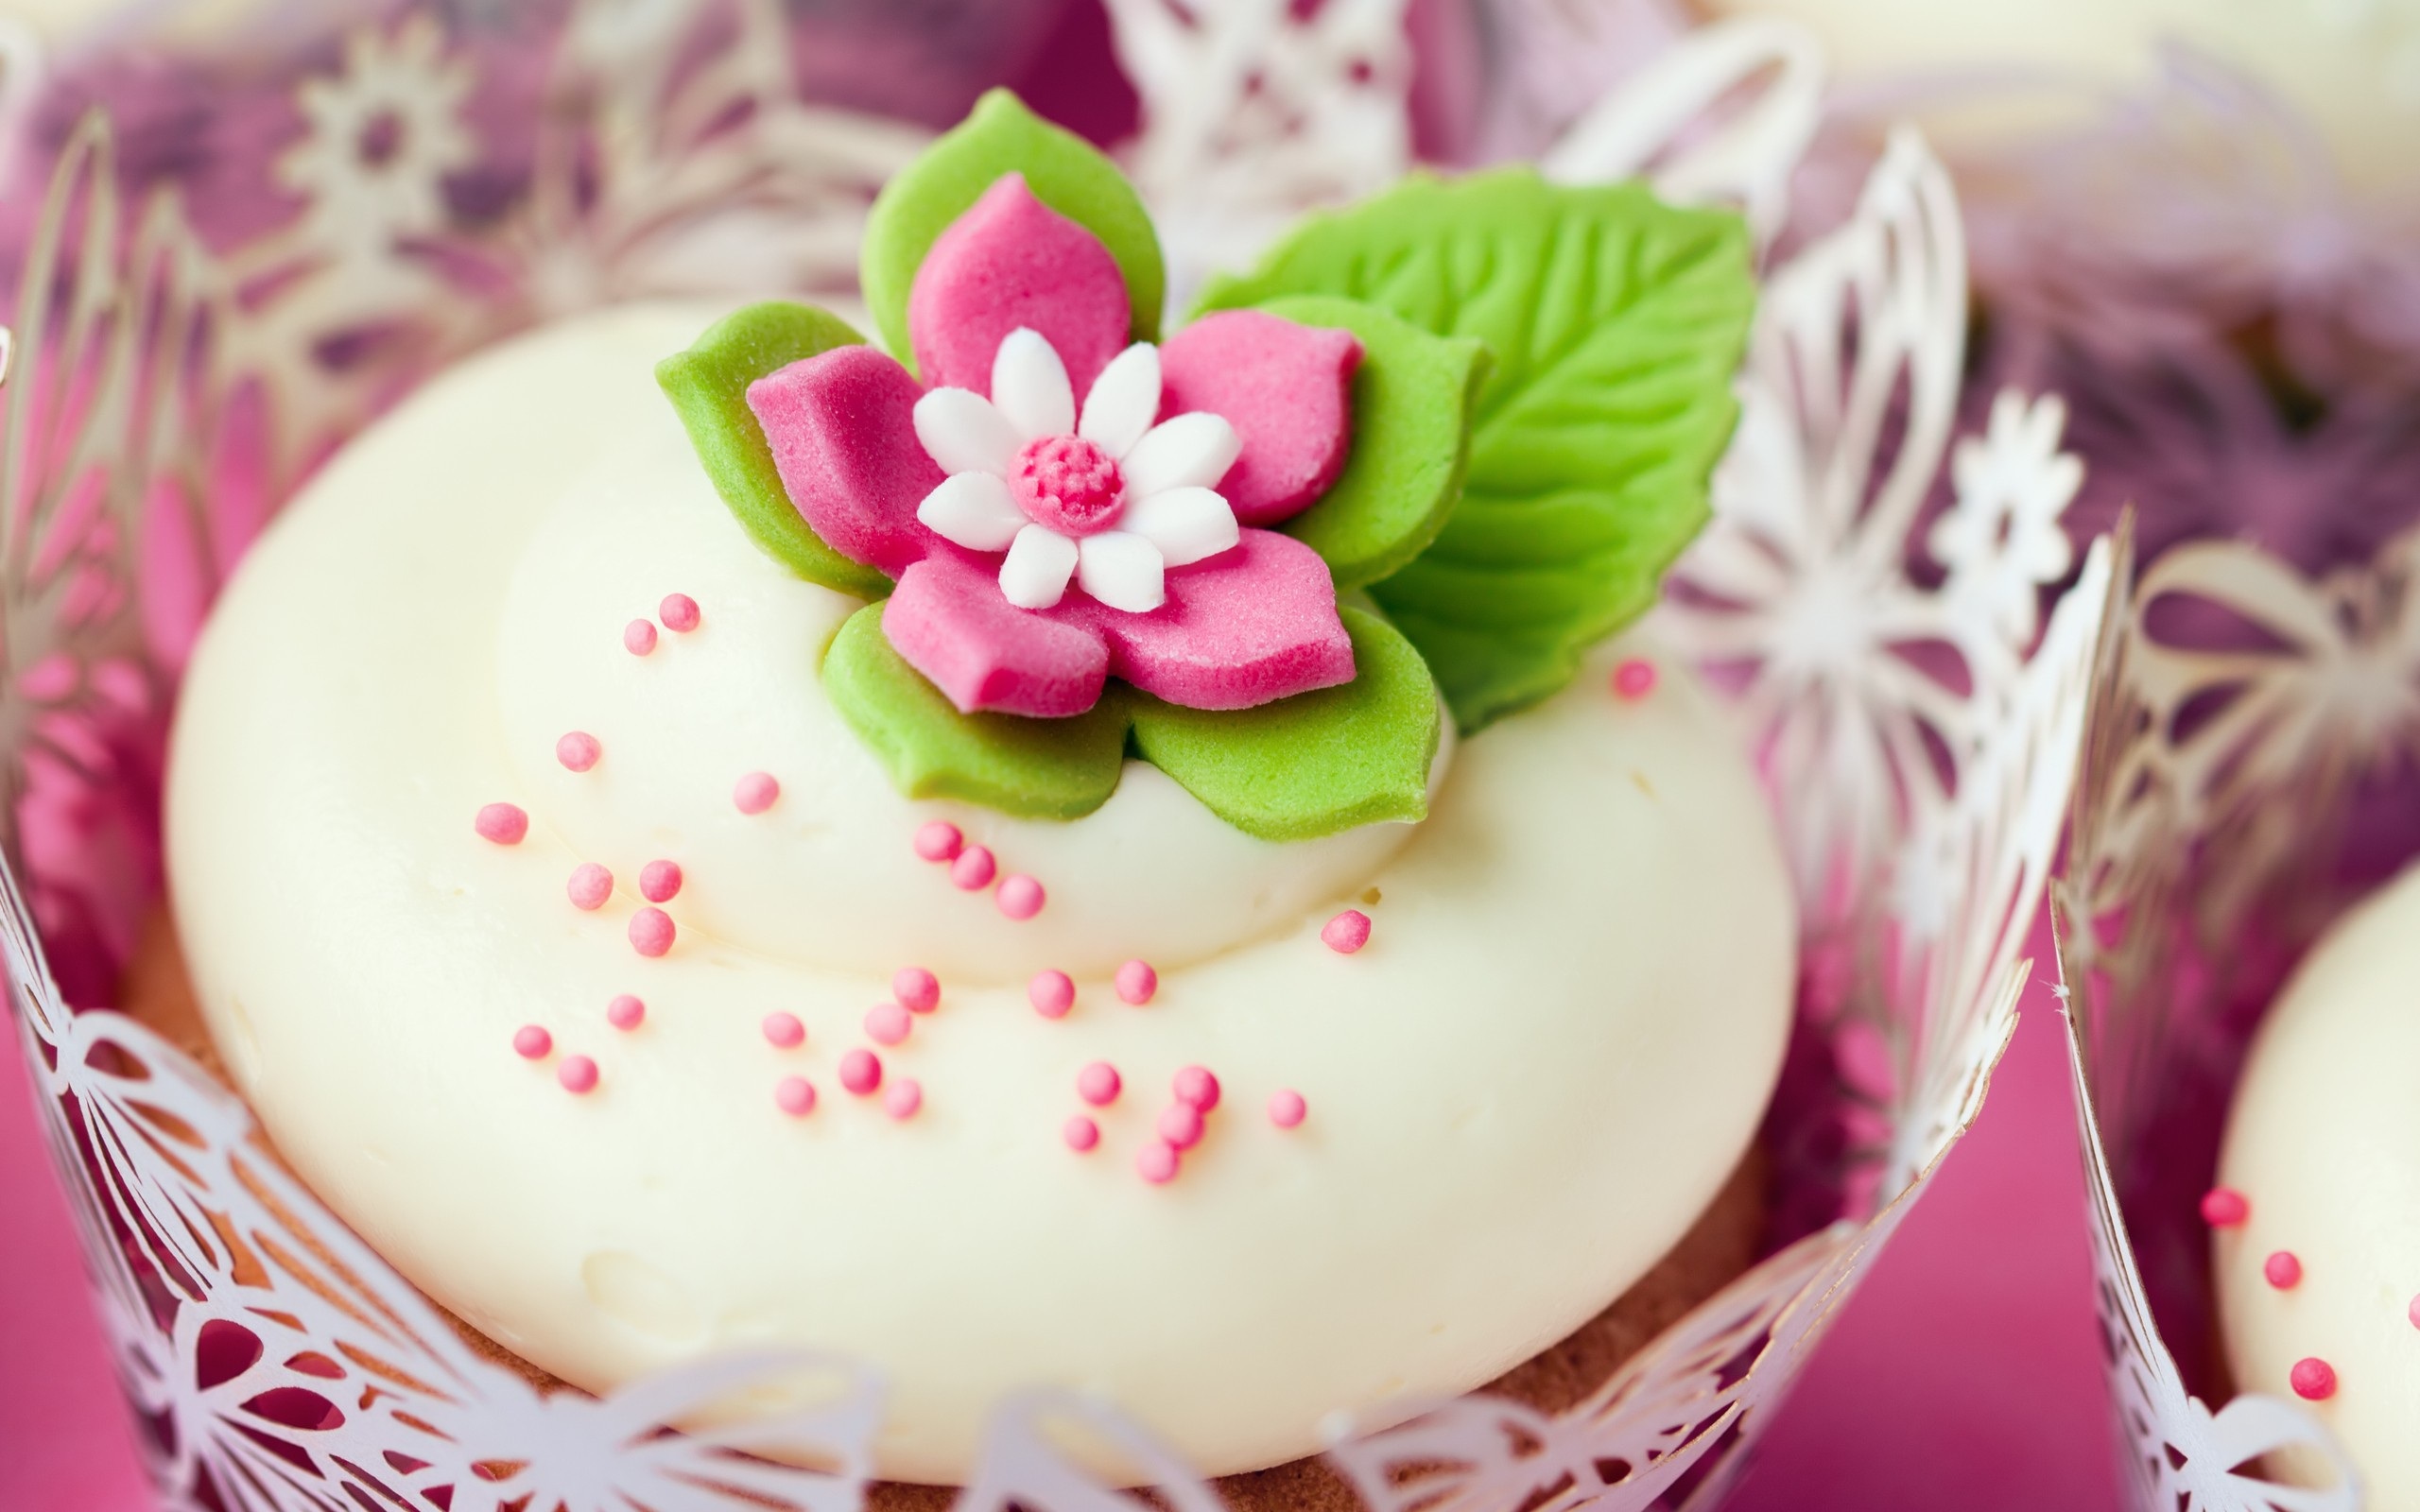 Download Cupcakes Wallpaper 654 2560x1600 px High Resolution